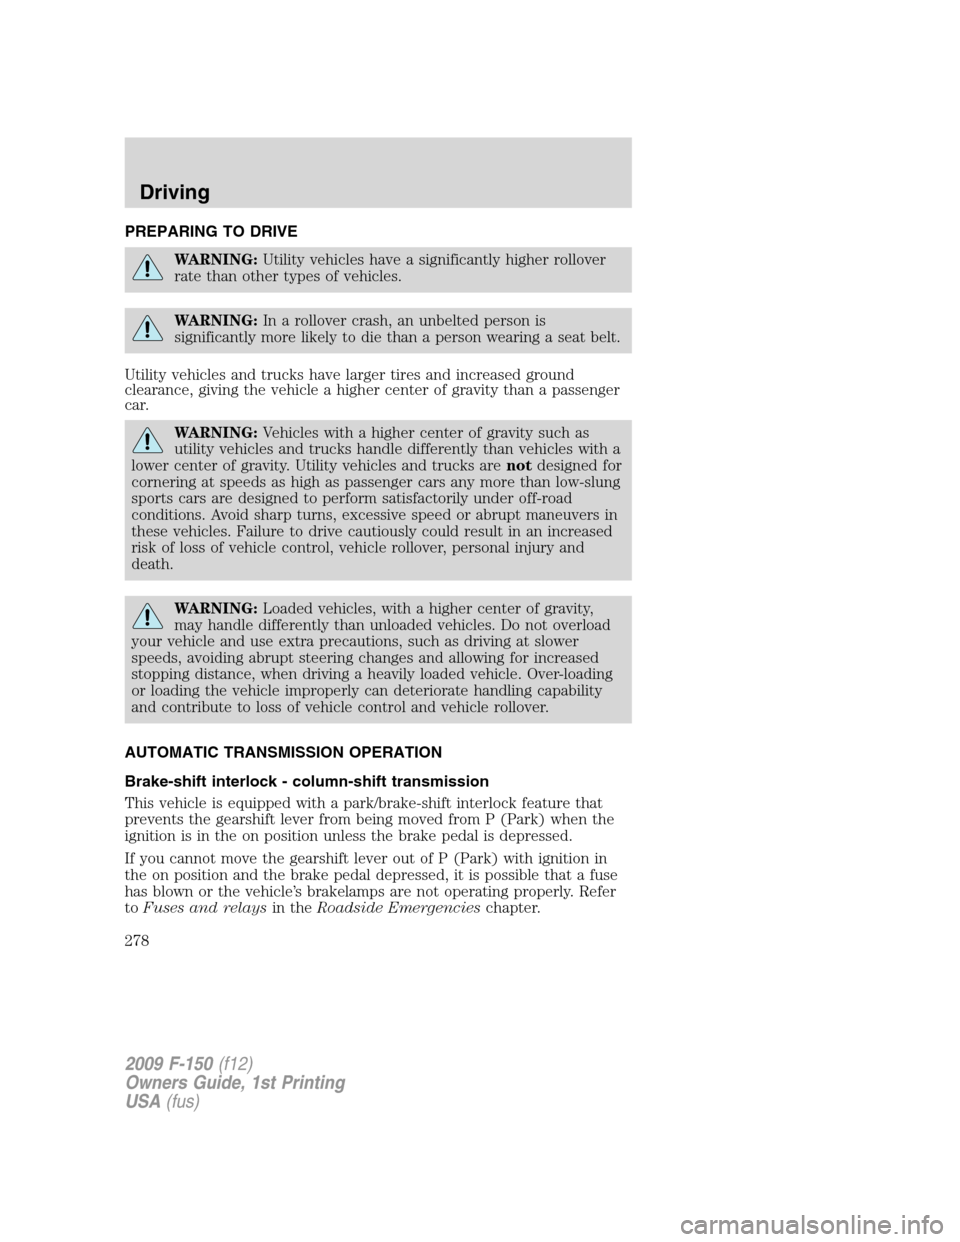 FORD F150 2009 12.G Owners Manual PREPARING TO DRIVE
WARNING:Utility vehicles have a significantly higher rollover
rate than other types of vehicles.
WARNING:In a rollover crash, an unbelted person is
significantly more likely to die 